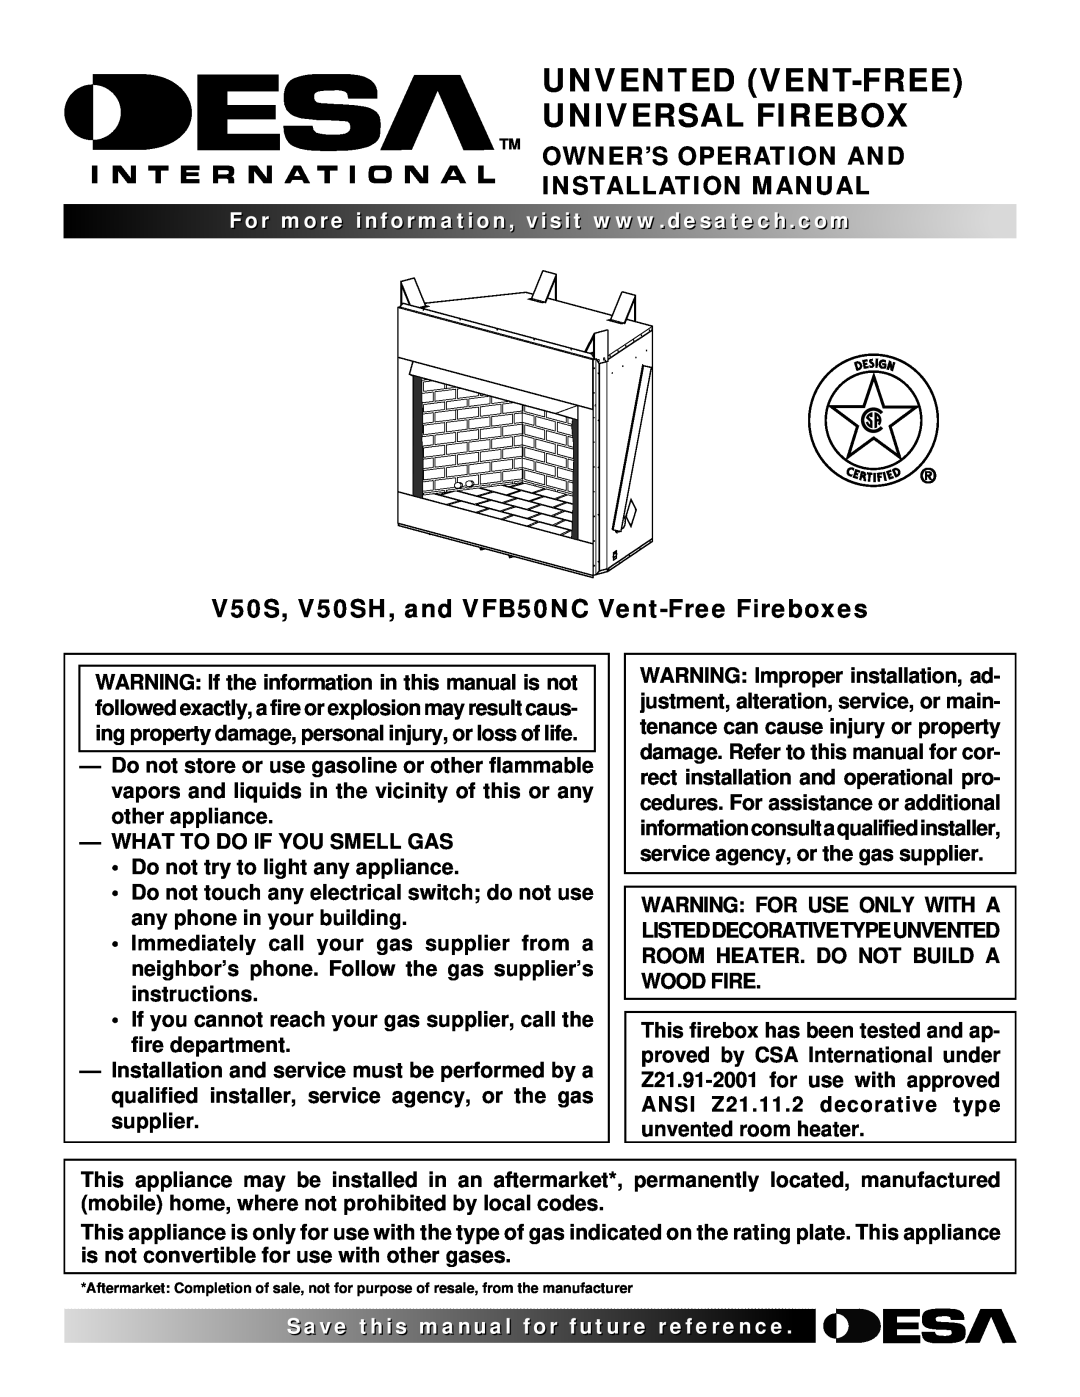 Desa VFB50NC, V50SH installation manual Unvented Vent-Free Universal Firebox, Save this manual for future 